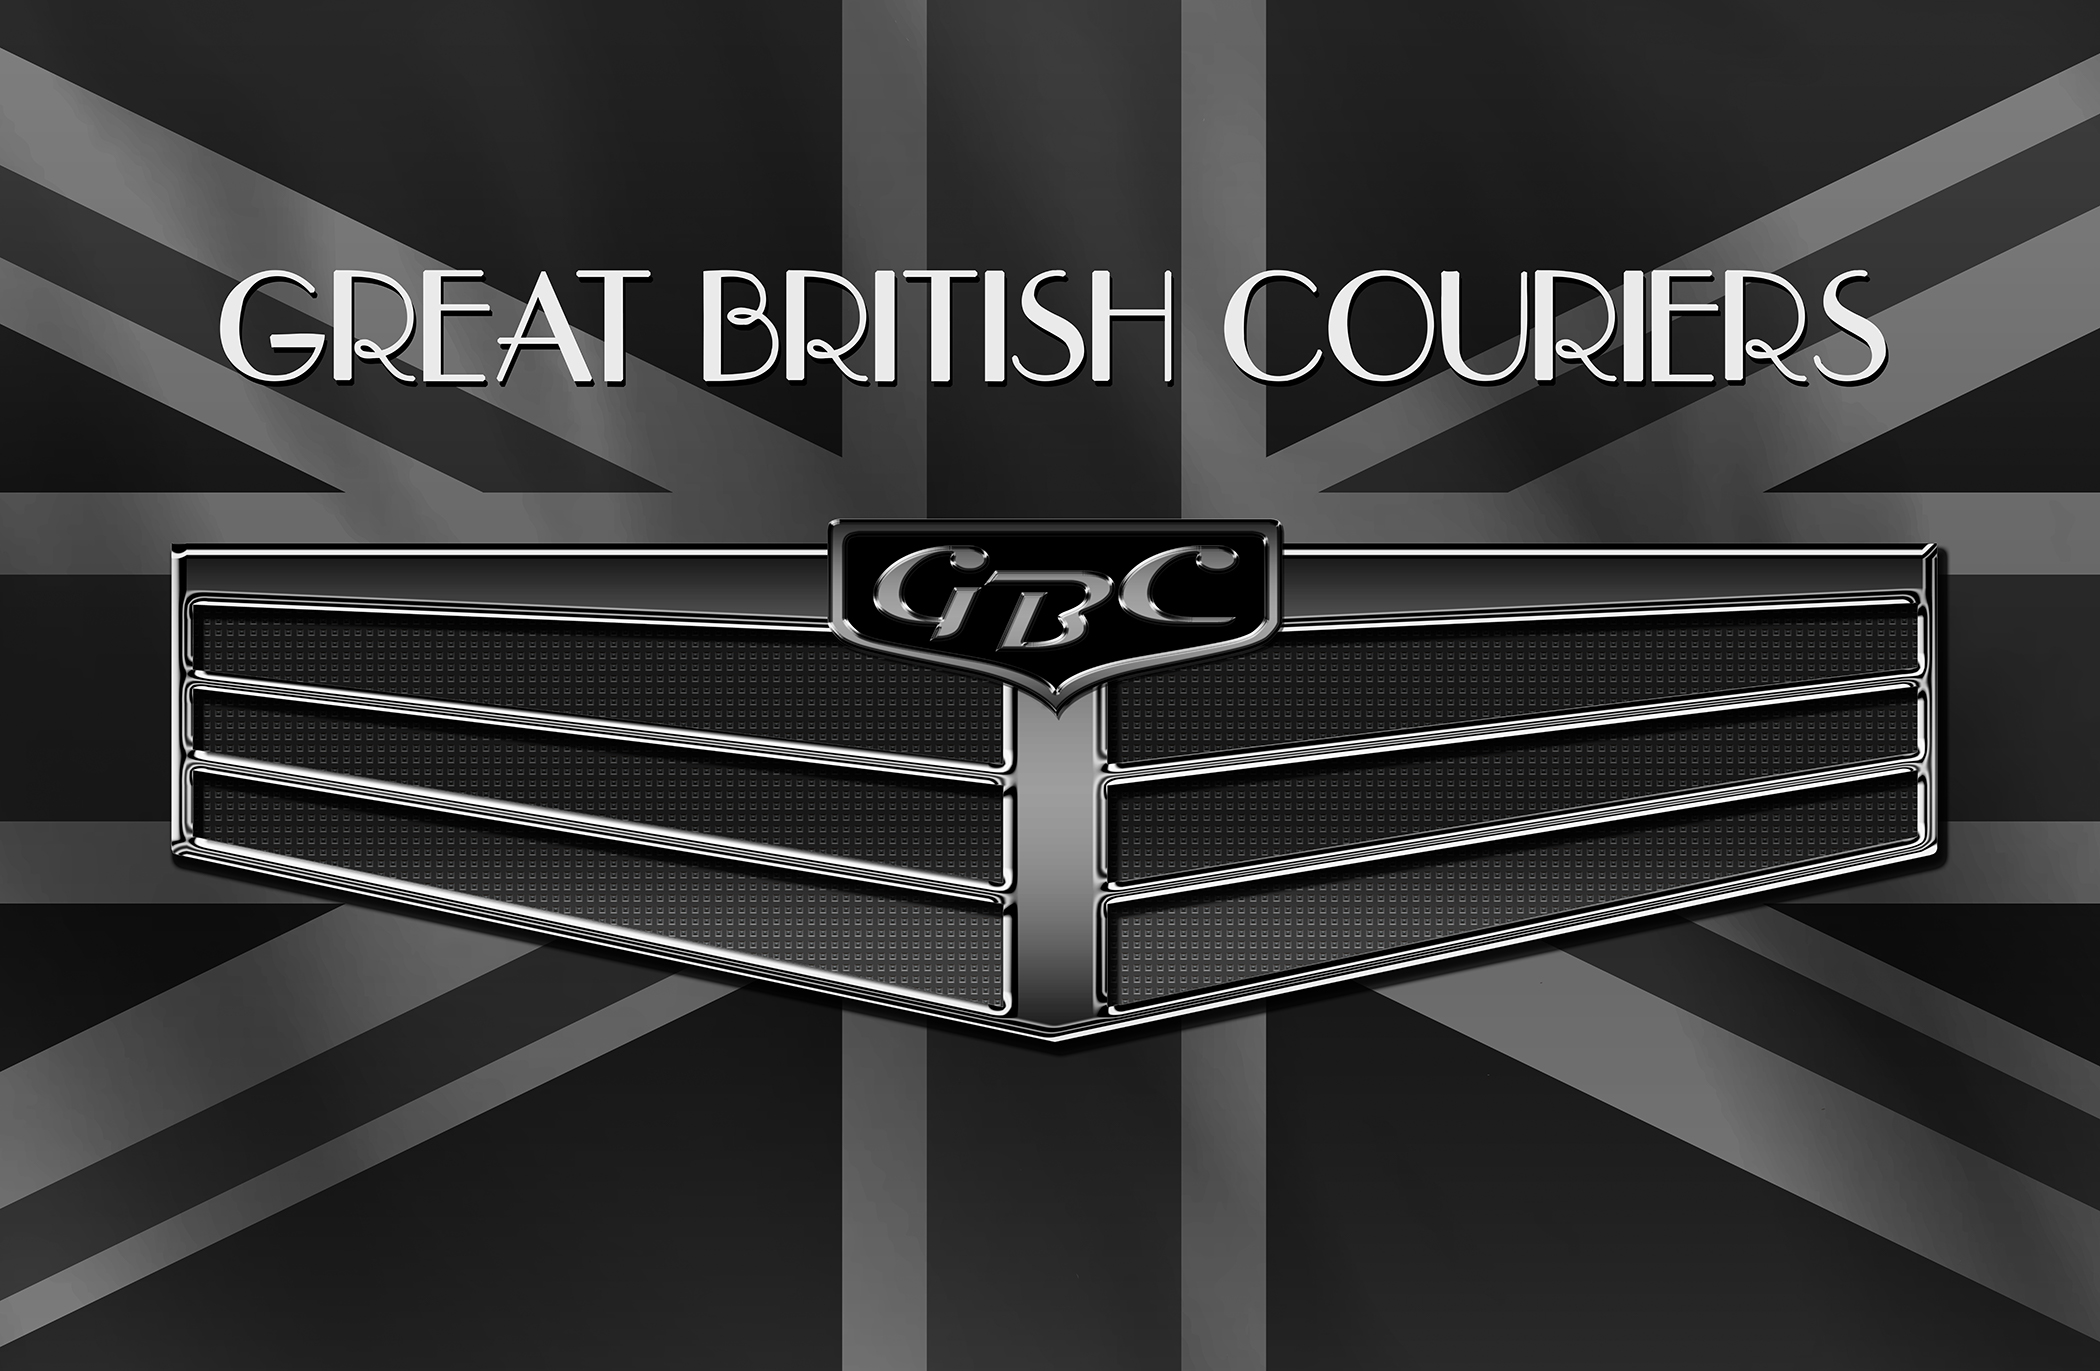 Great British Couriers